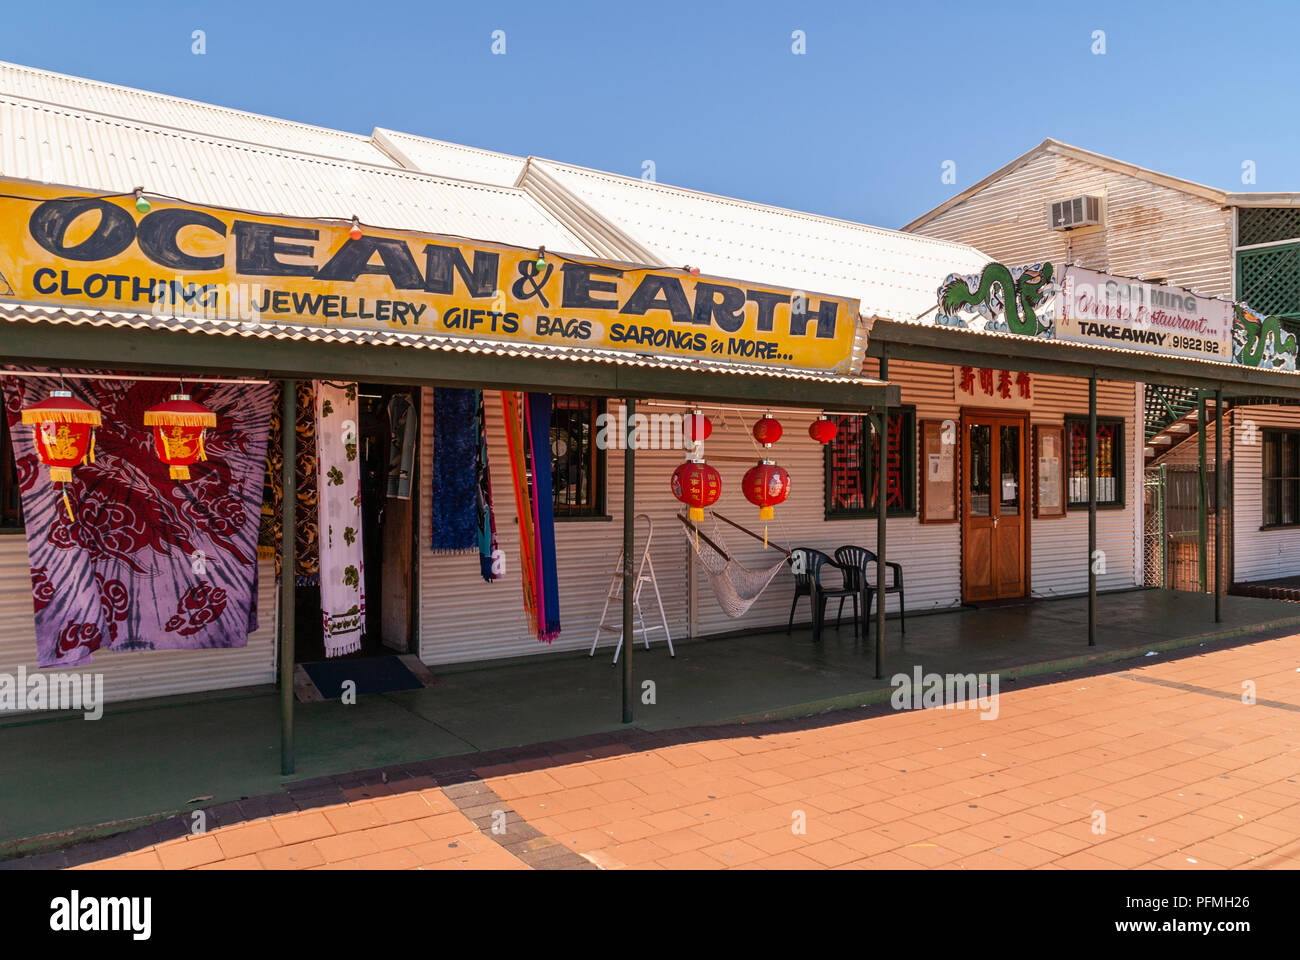 Broome, WA, Australia - November 29, 2009: Ocean and Earth souvenir shop in row of businesses sells clothing, gifts, jewelry and more. Blue sky and ch Stock Photo